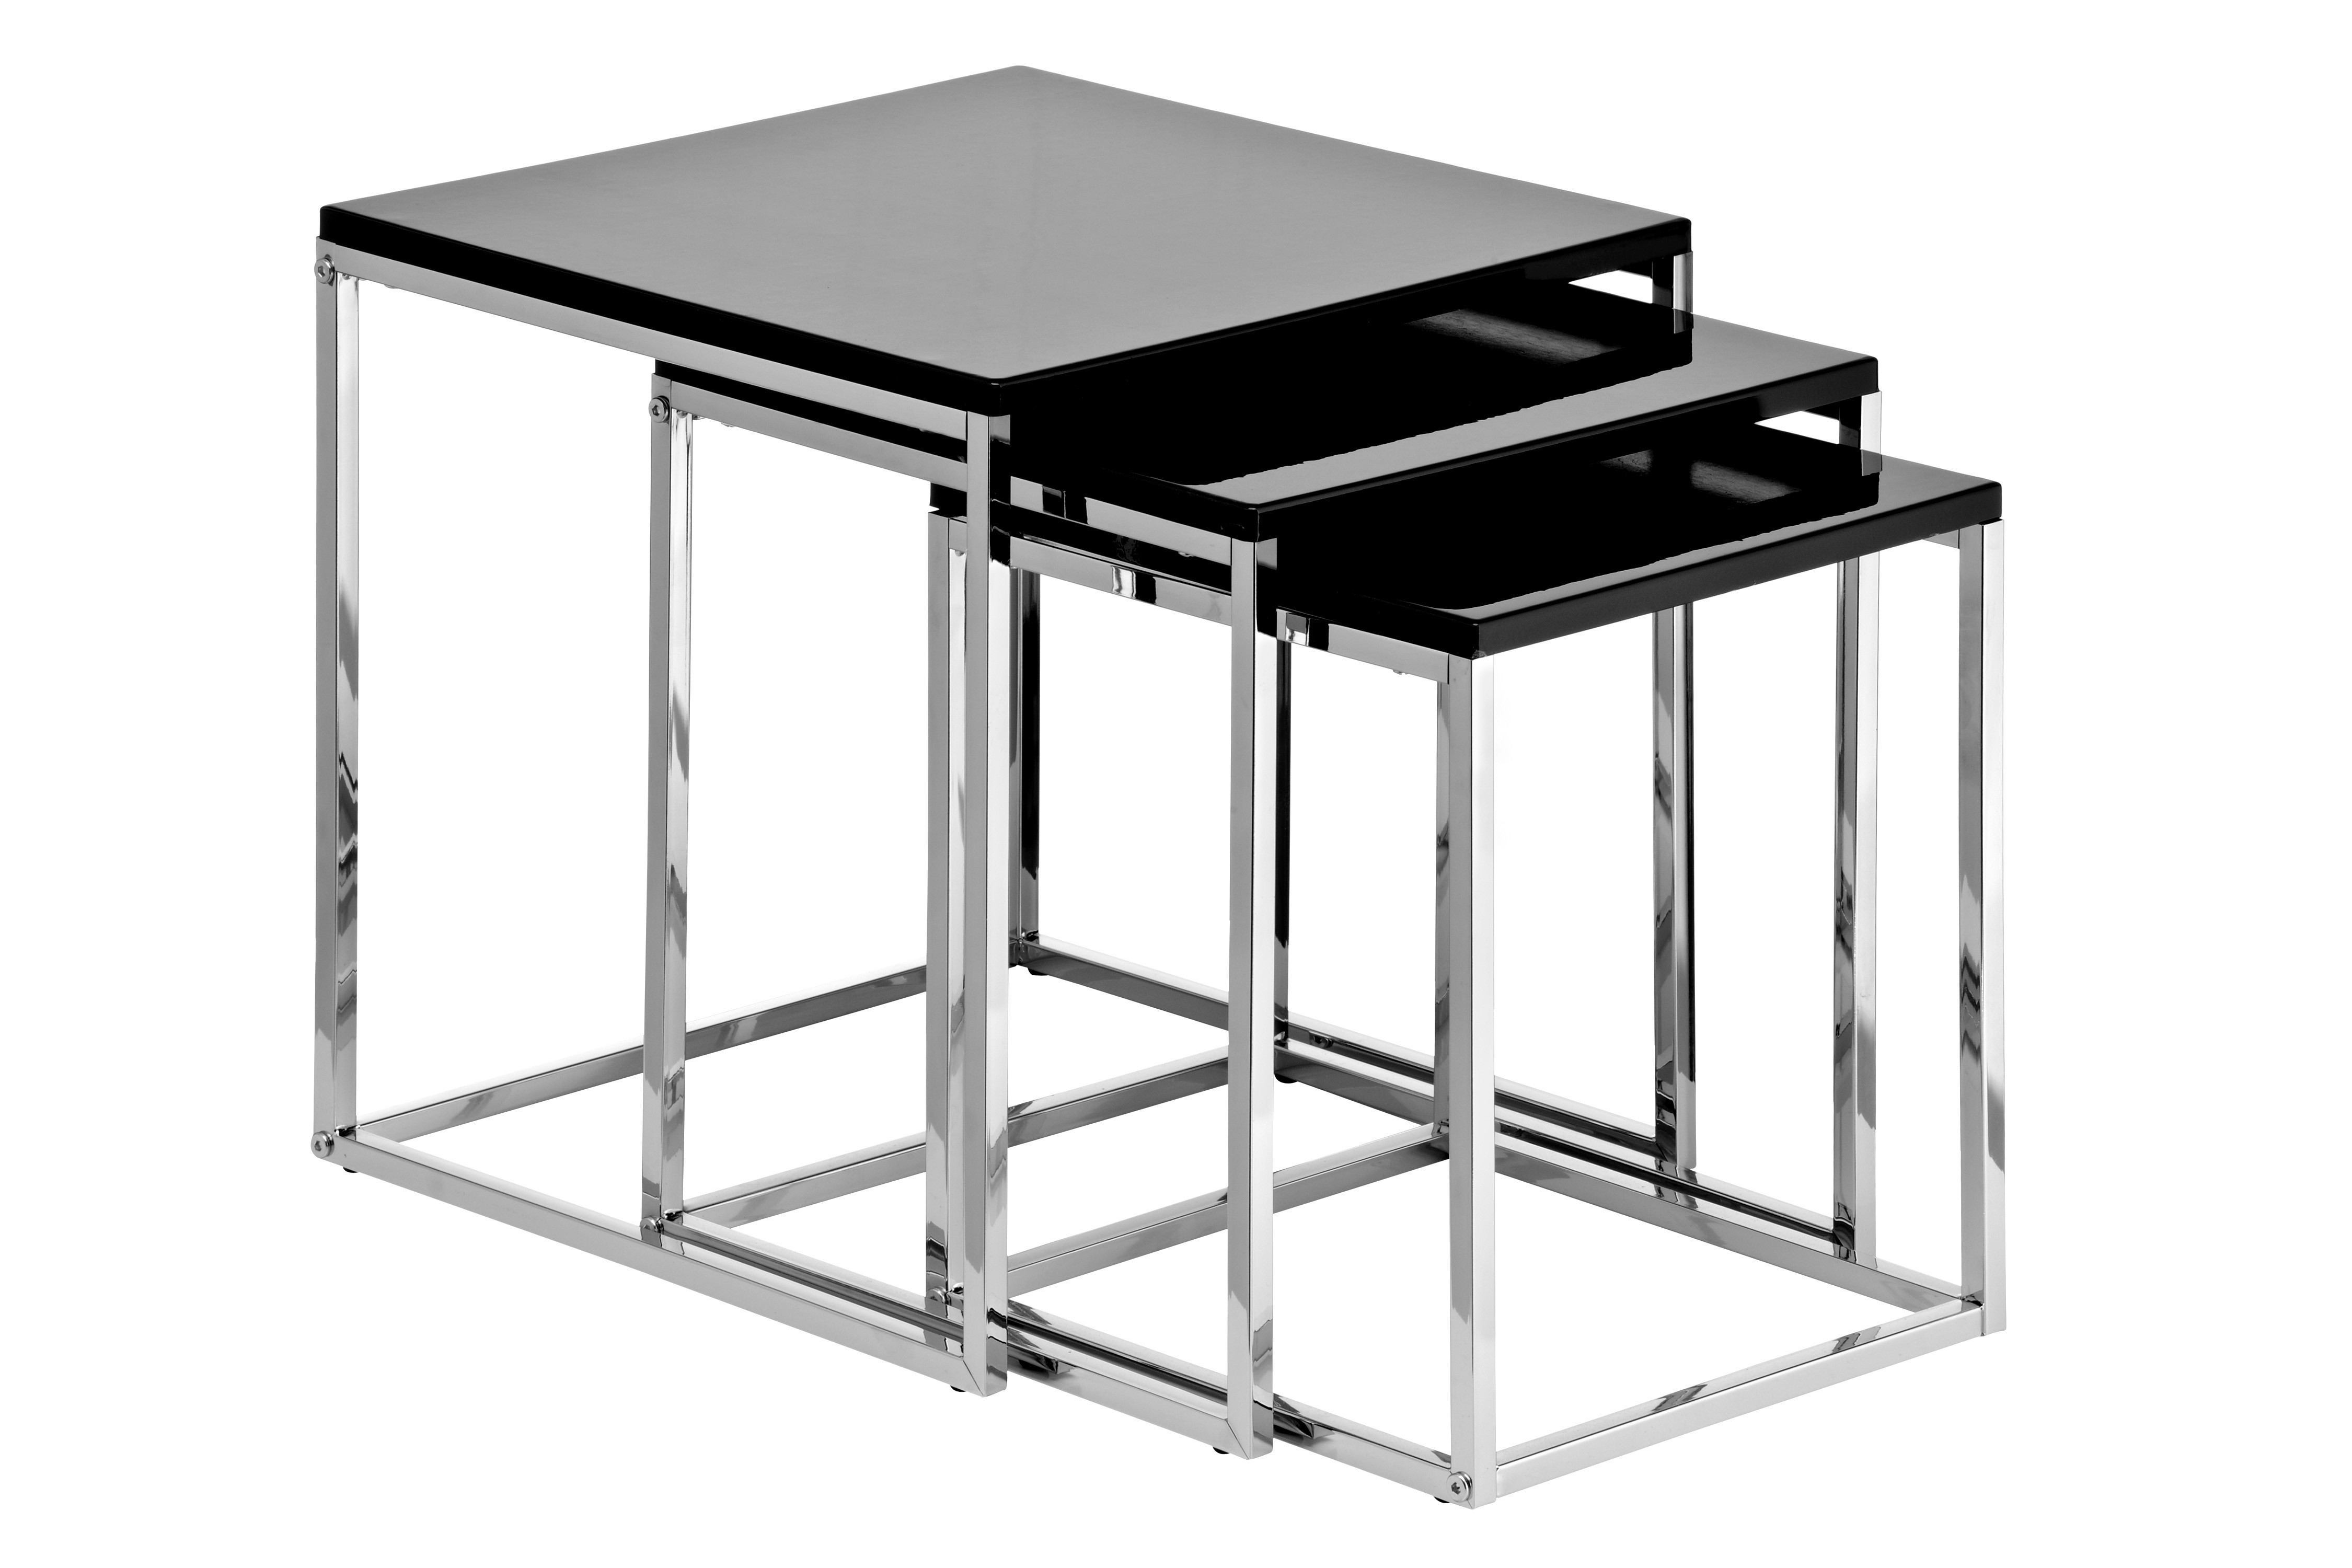 Premier Housewares Nested Tables with Chrome Legs